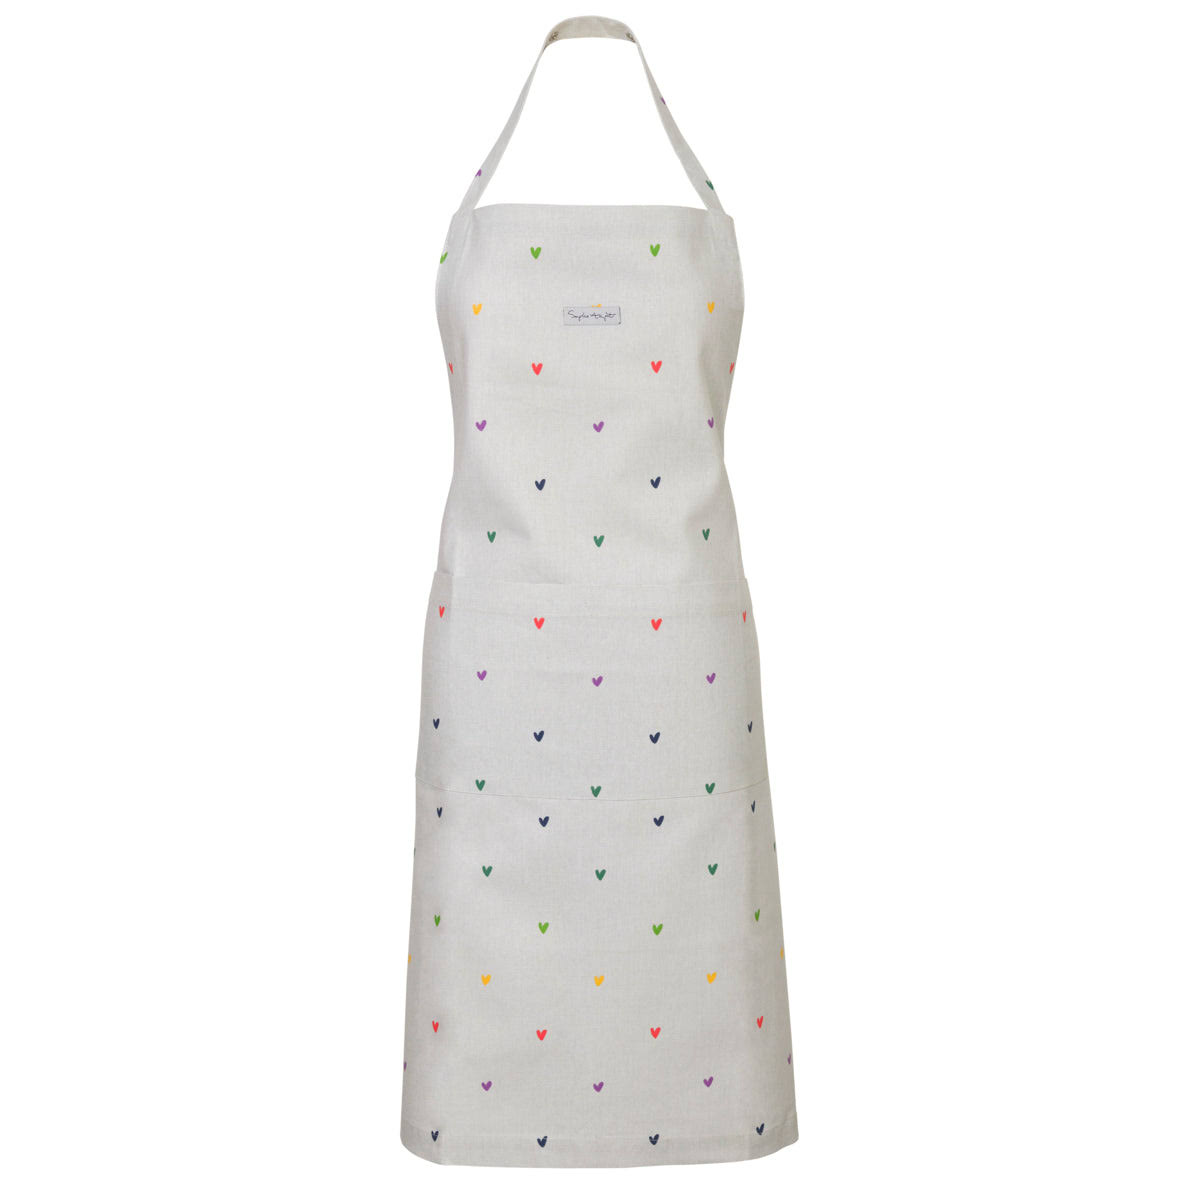 Multicoloured Hearts Adult Apron by Sophie Allport